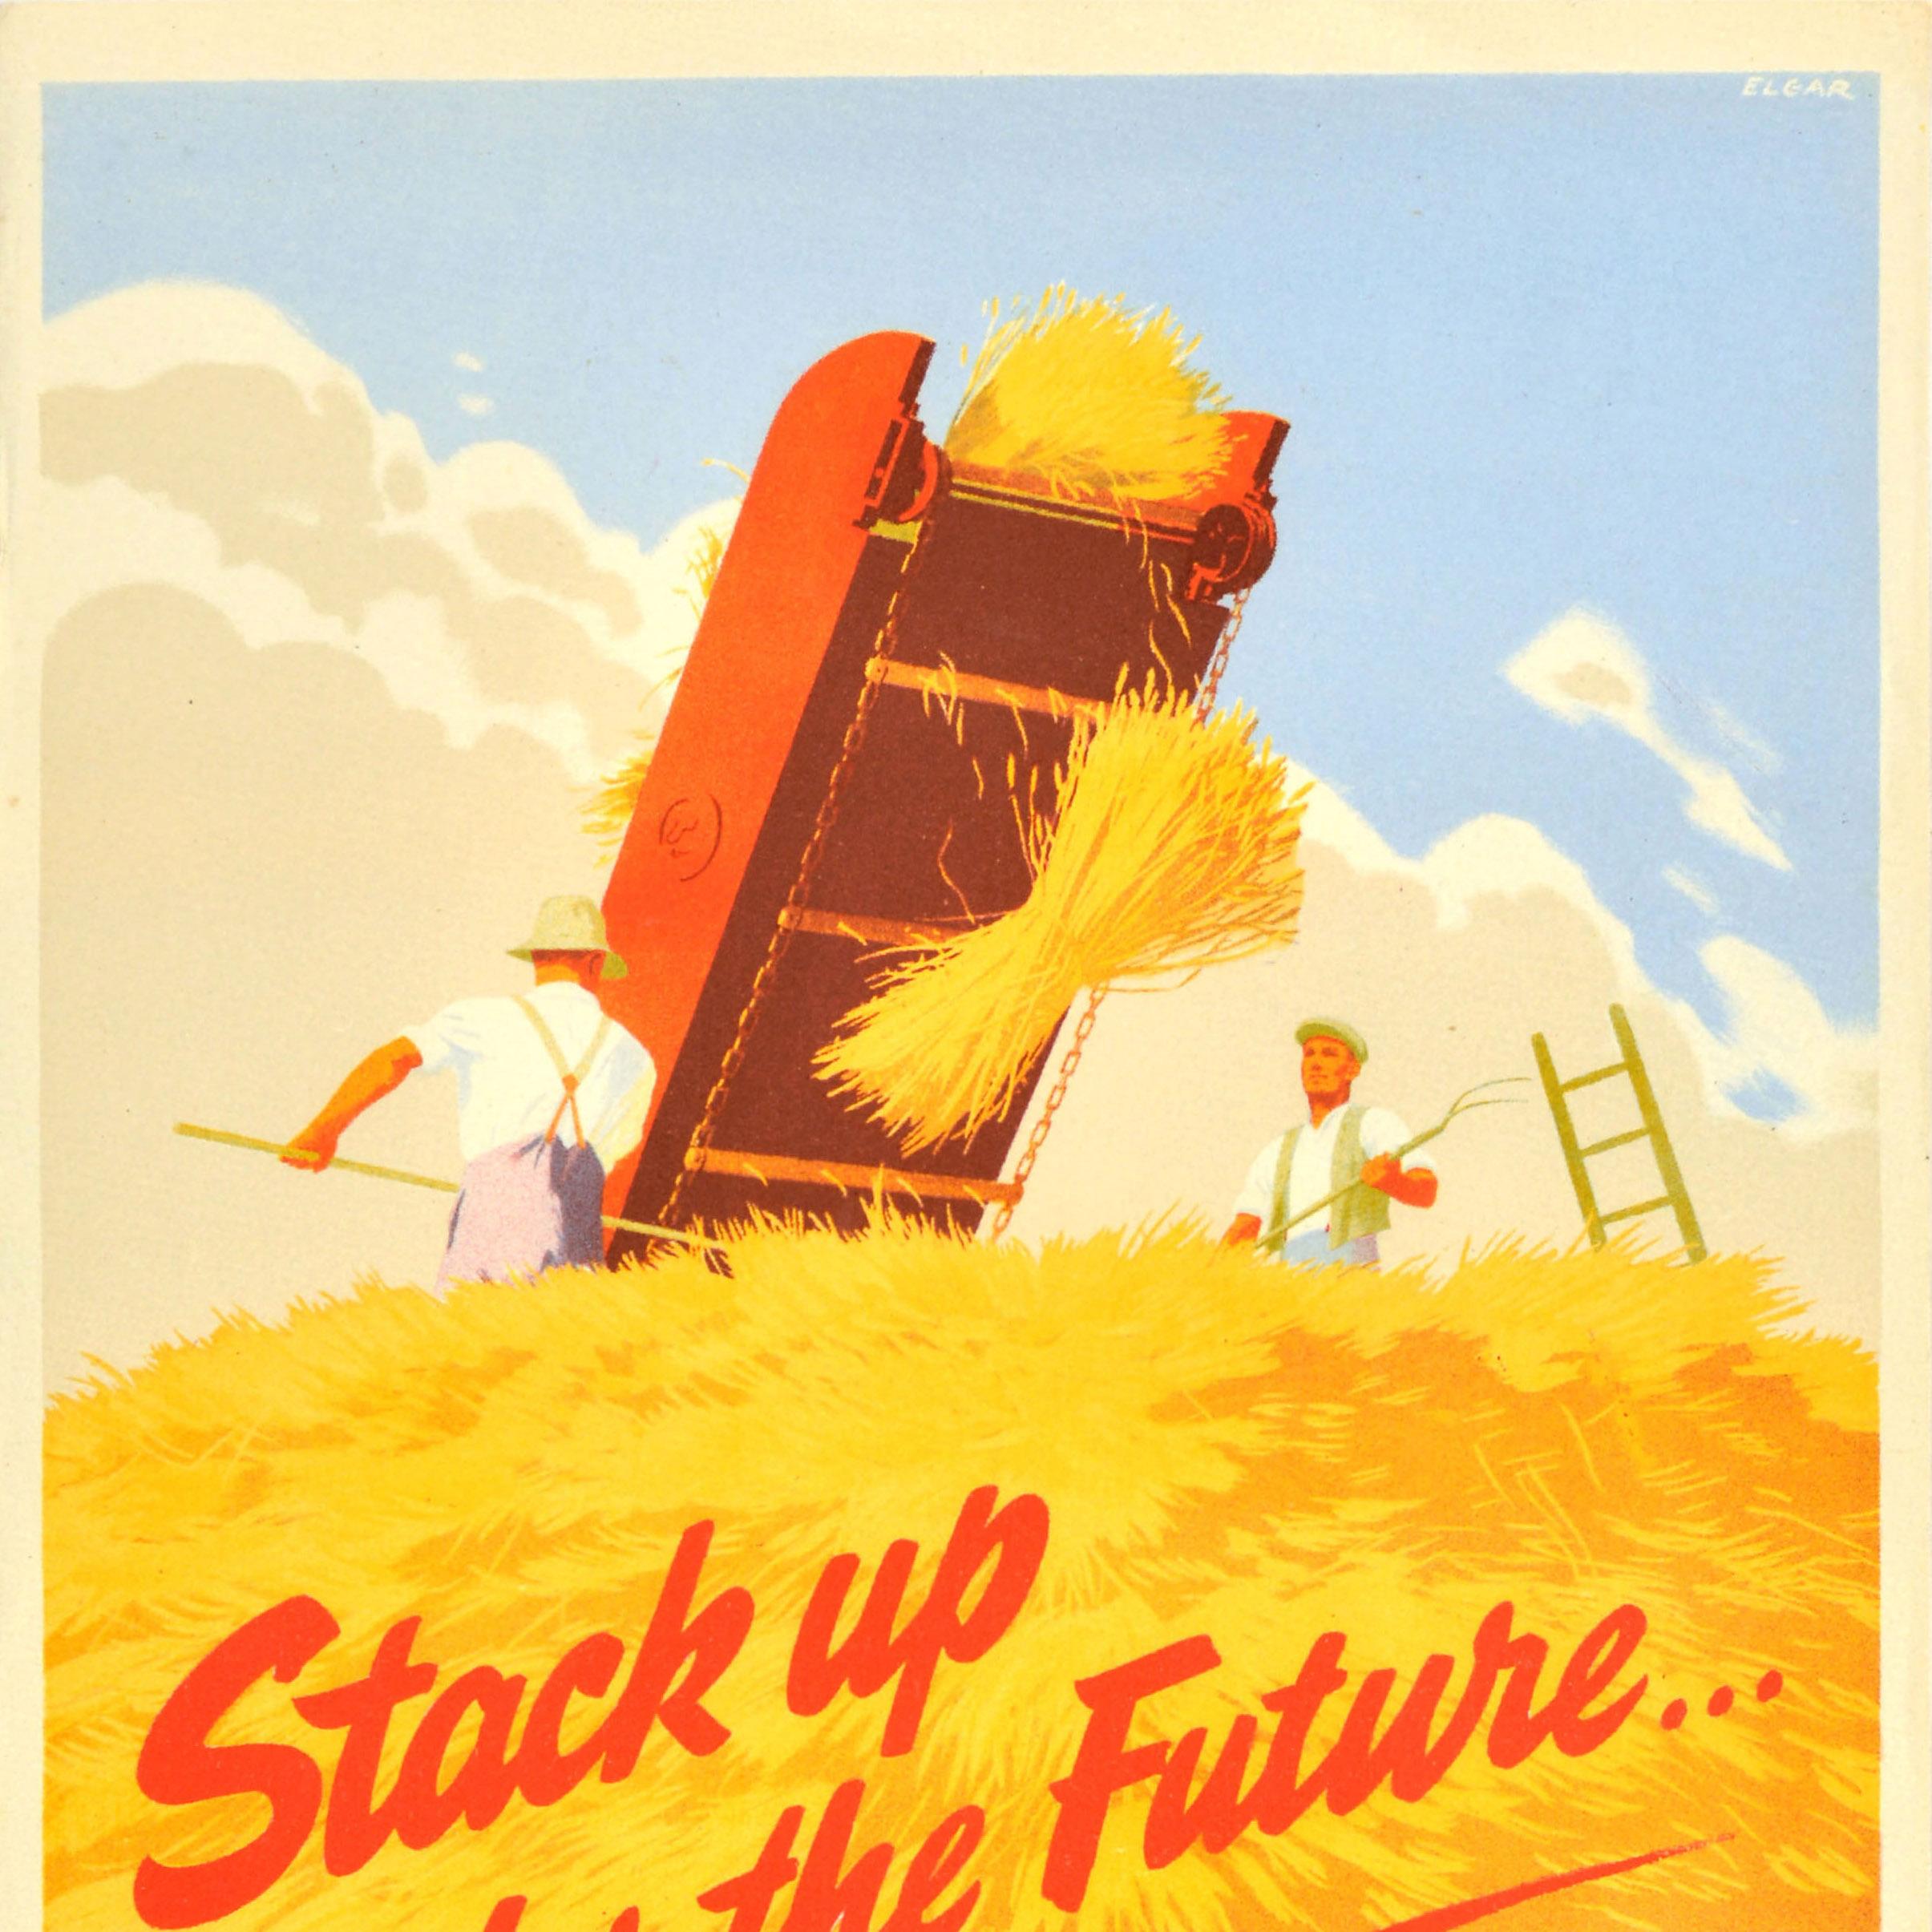 British Original Vintage Advertising Poster Stack Up For The Future National Savings For Sale